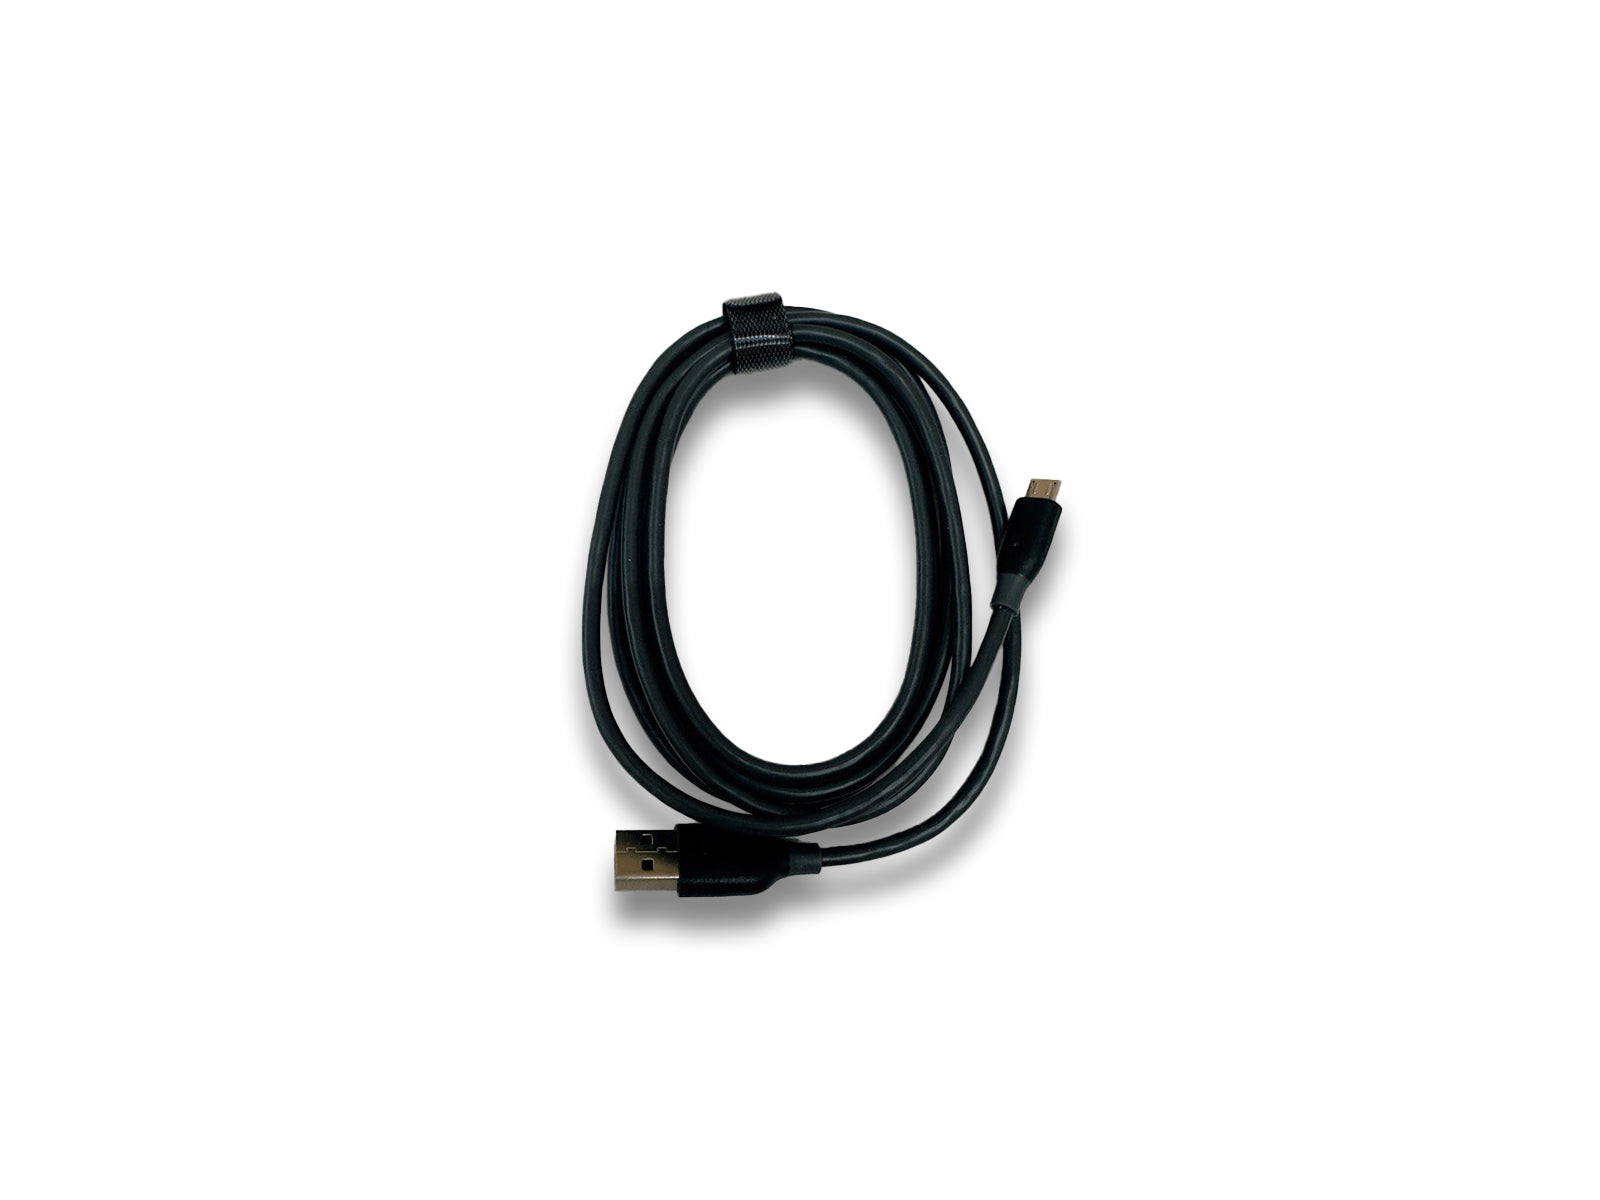 Image shows top view of cable on white background